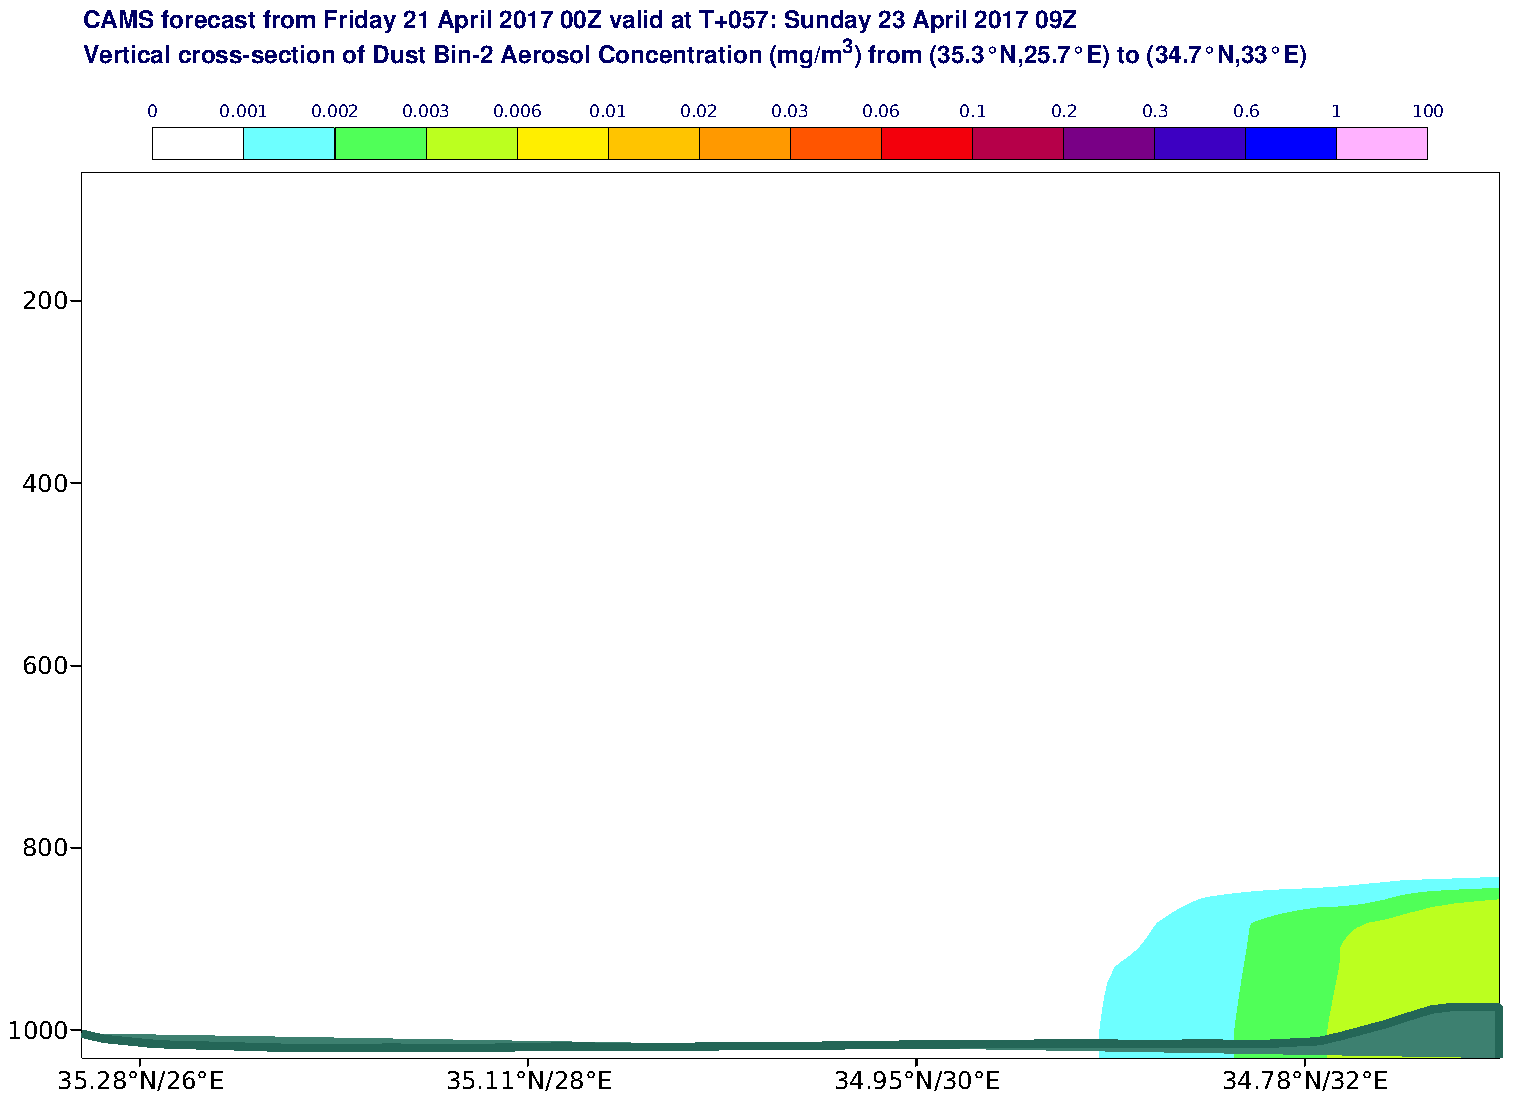 Vertical cross-section of Dust Bin-2 Aerosol Concentration (mg/m3) valid at T57 - 2017-04-23 09:00